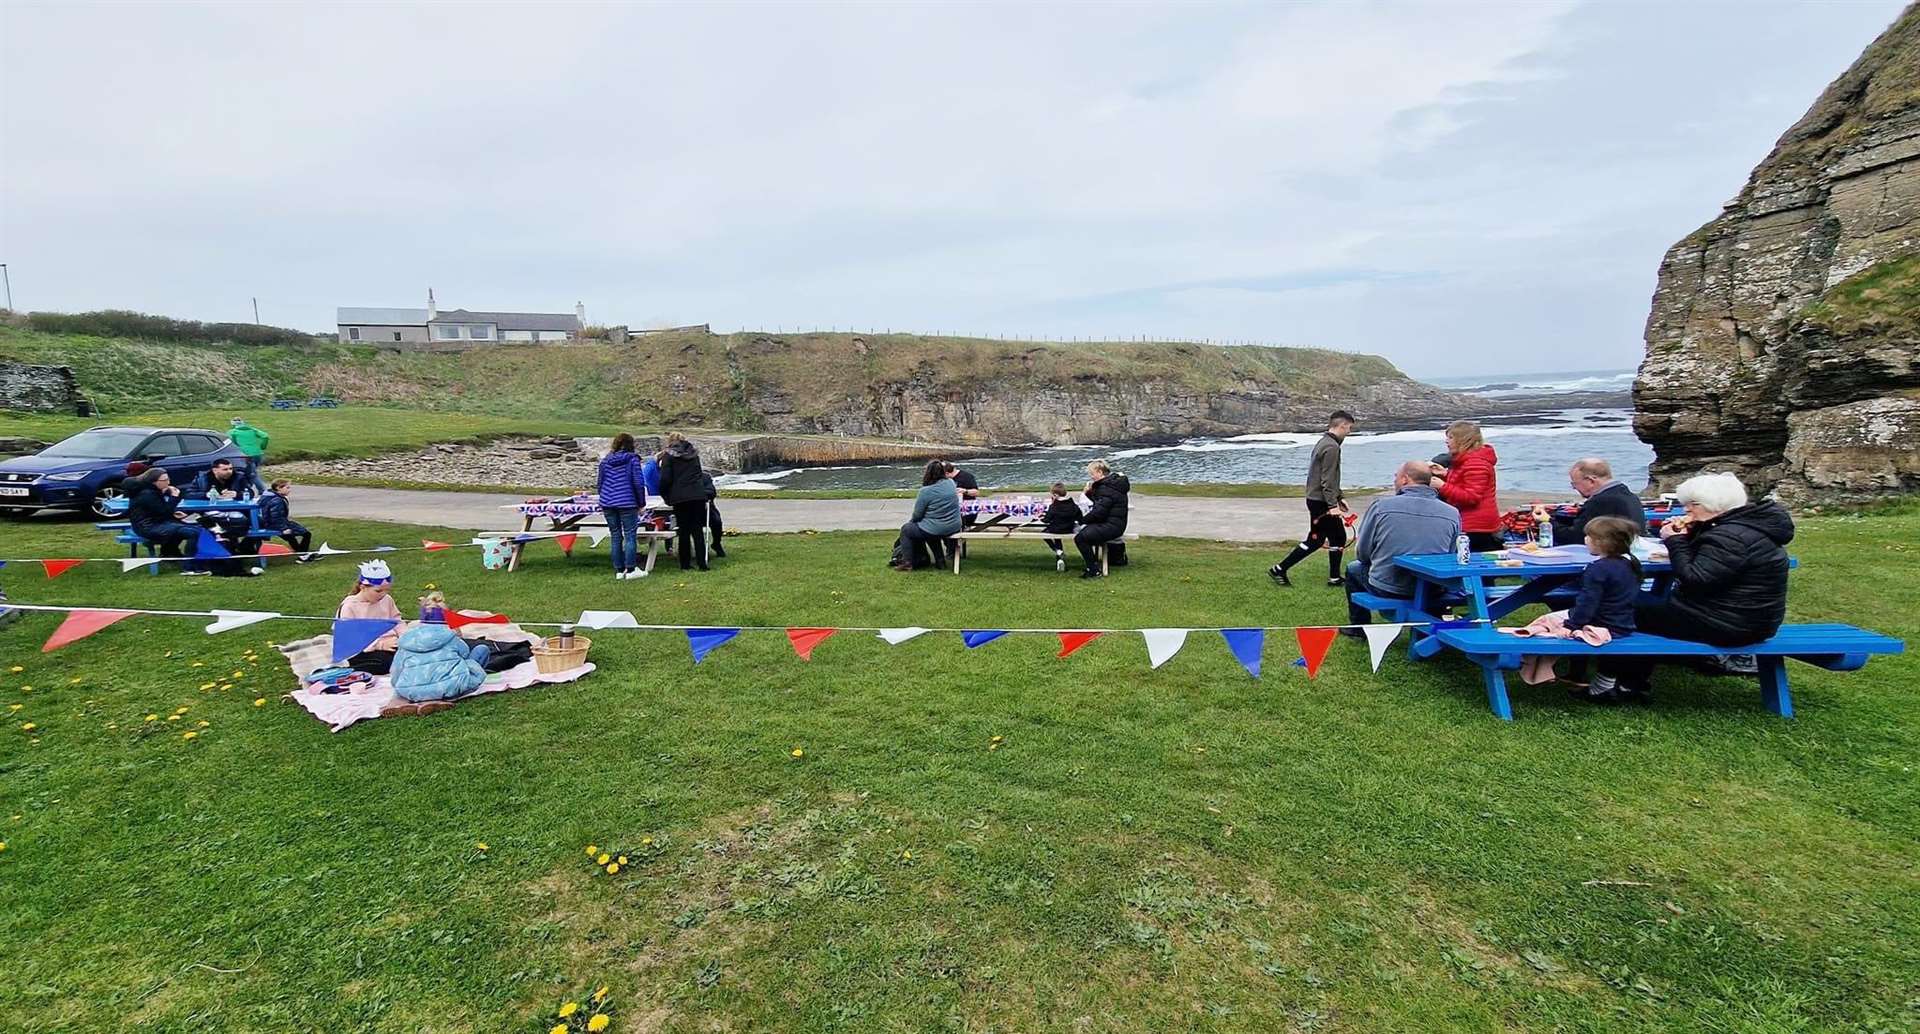 The Staxigoe harbour area was decorated with bunting to mark the occasion.